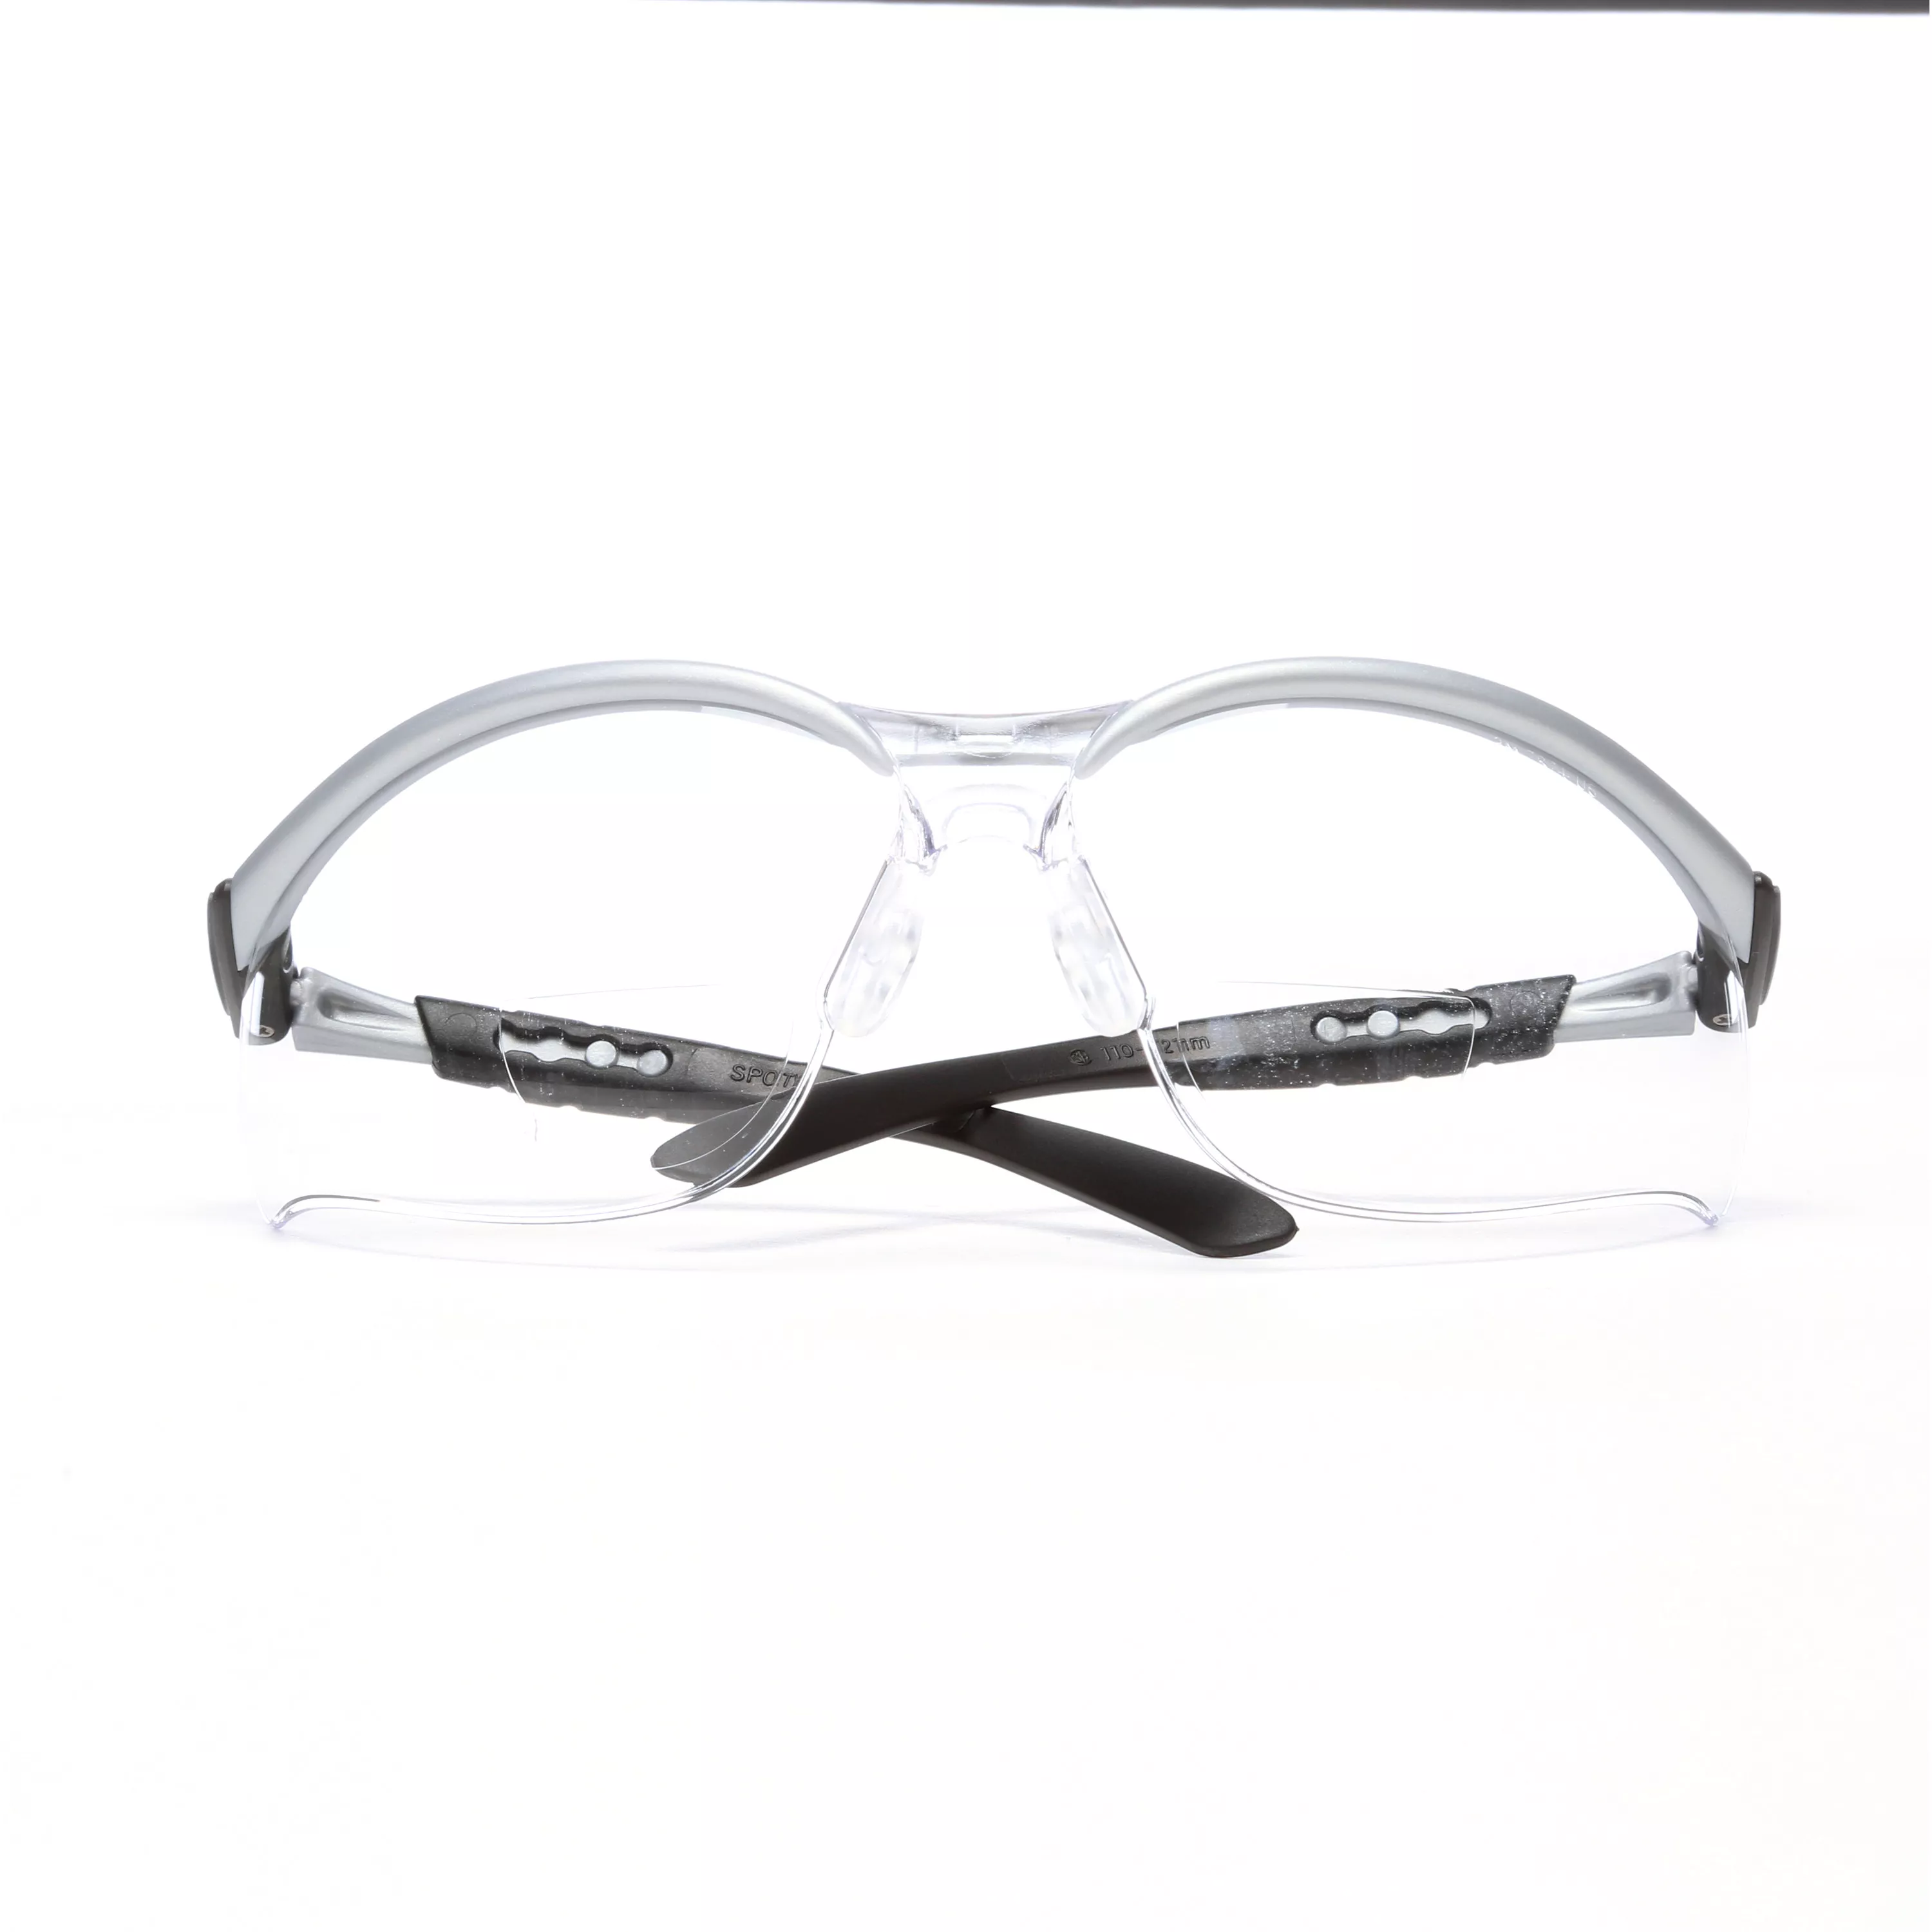 3M™ BX™ Reader Protective Eyewear 11374-00000-20, Clear Lens, Silver
Frame, +1.5 Diopter, 20 ea/Case